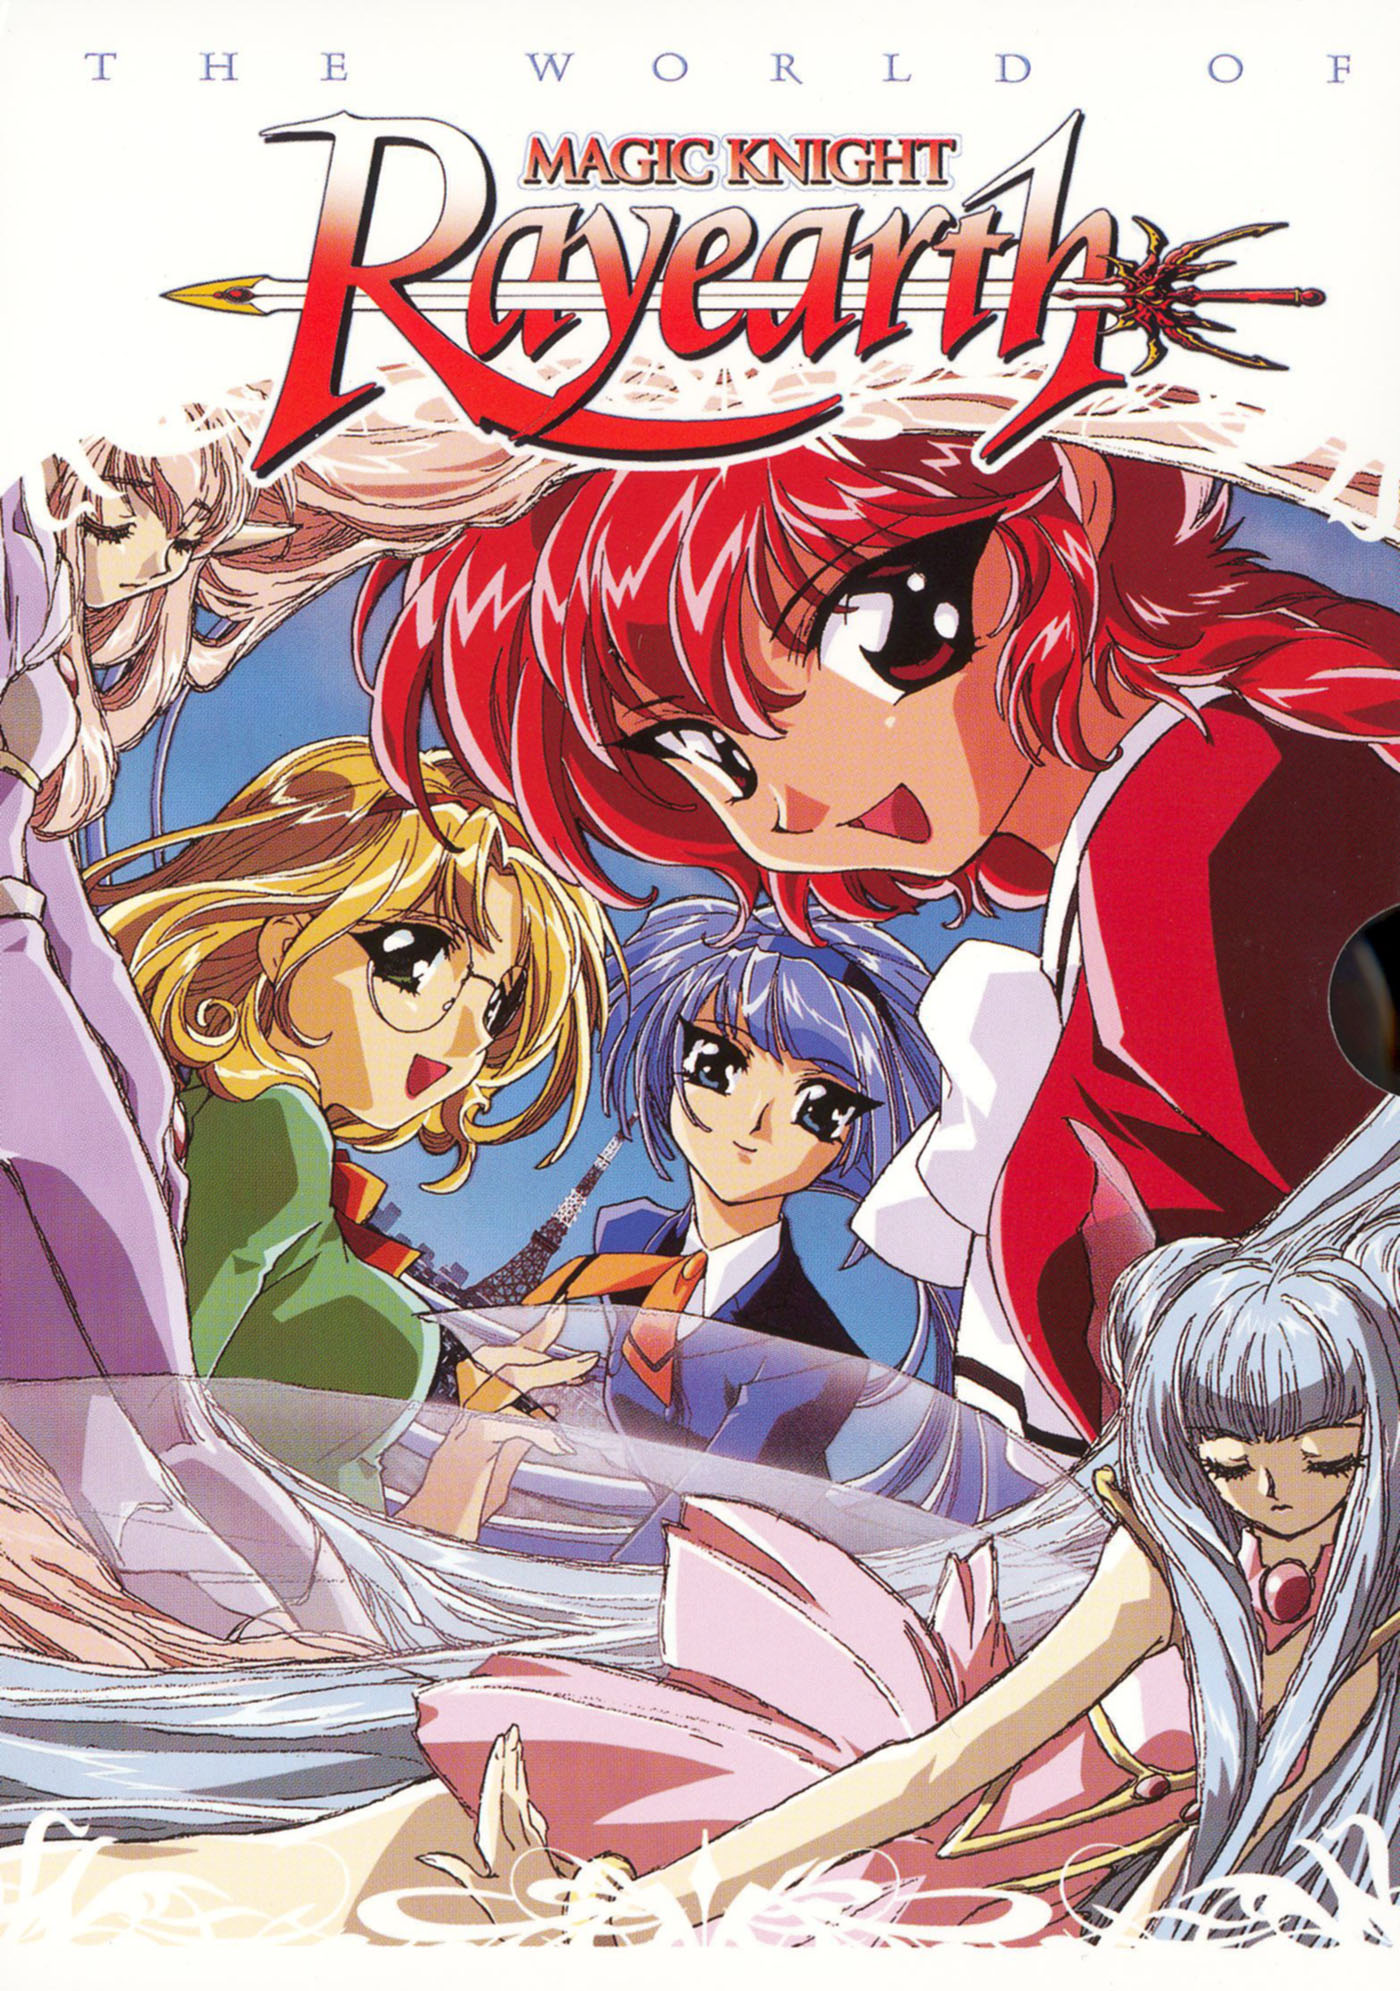 Magic Knight Rayearth deserves more love